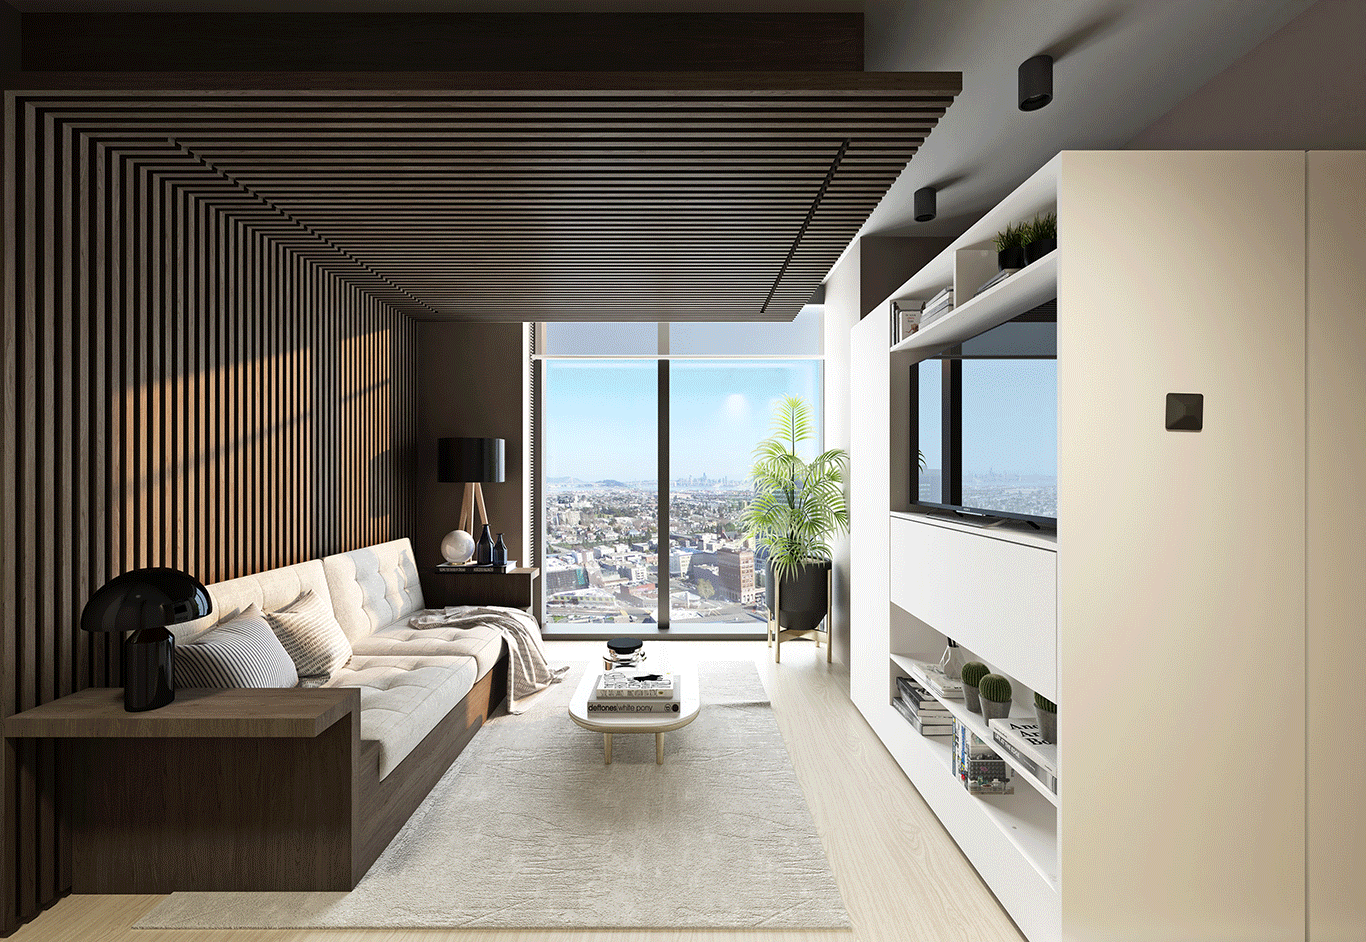 1900 Broadway residential interior with space-efficient furniture package, GIF courtesy Behring Co, rendering by Elizabeth Premazzi